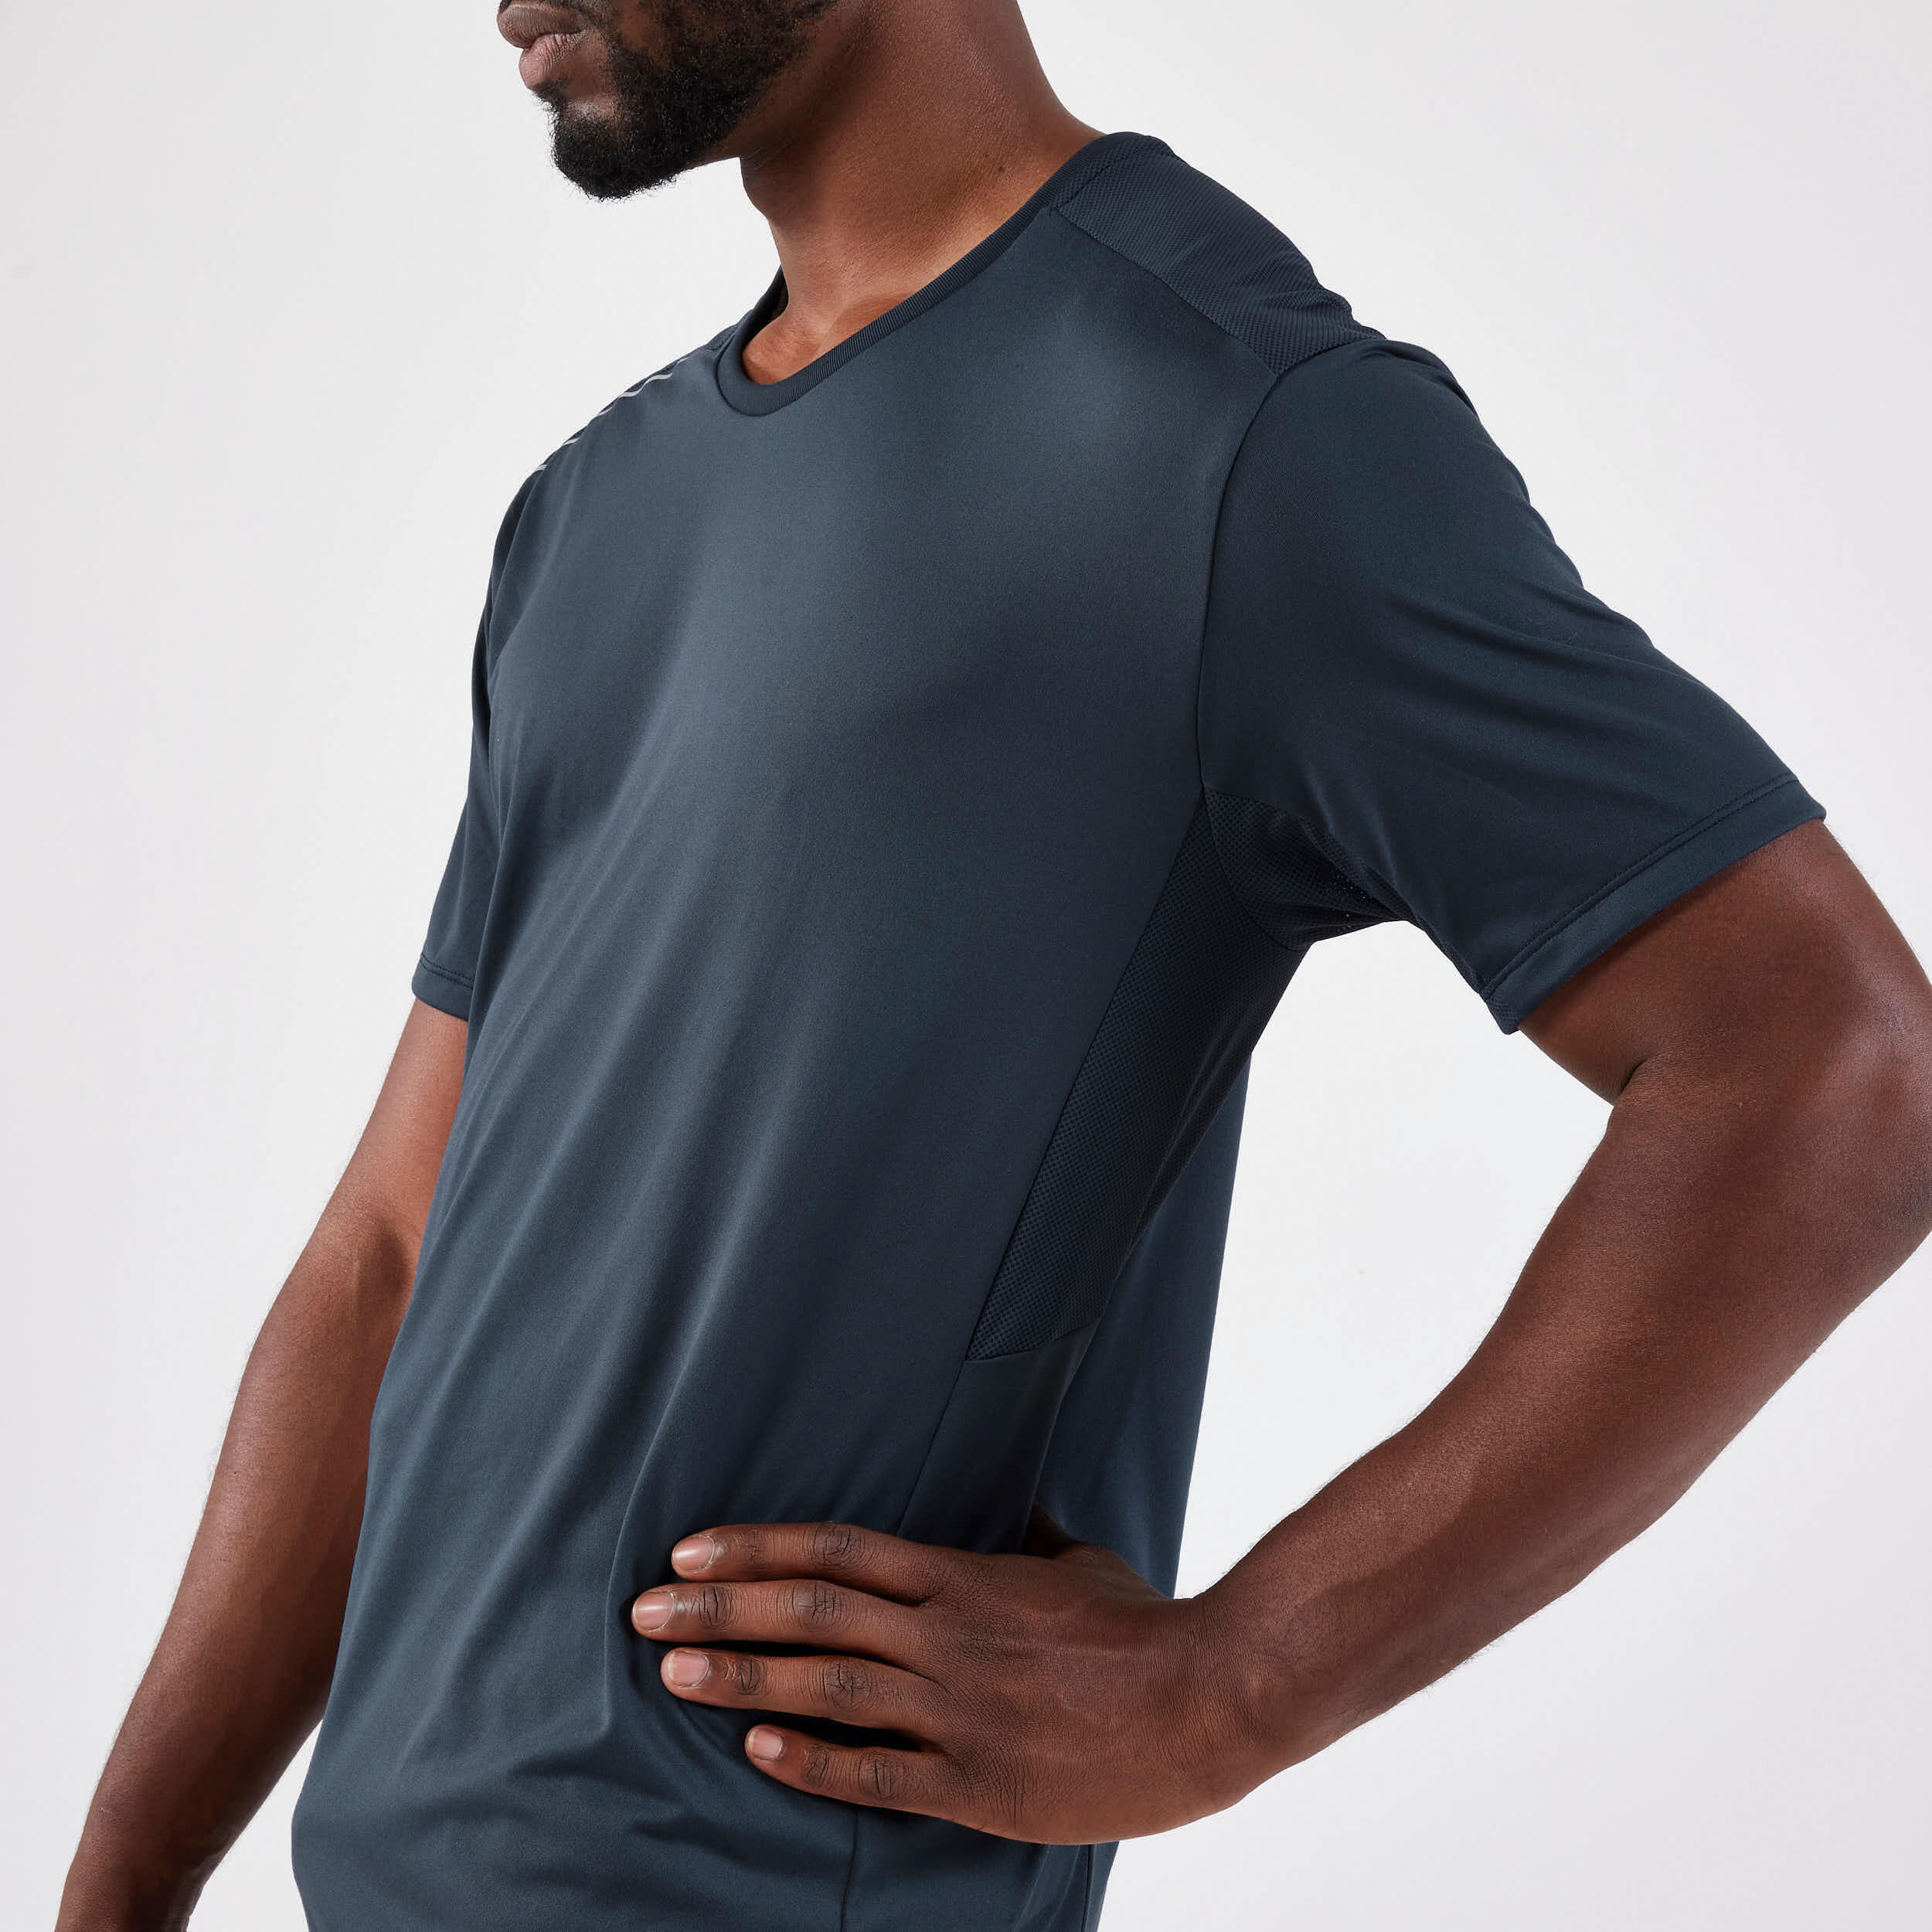 Dry+ Men's Running Breathable Tank Top - Blue 6/6